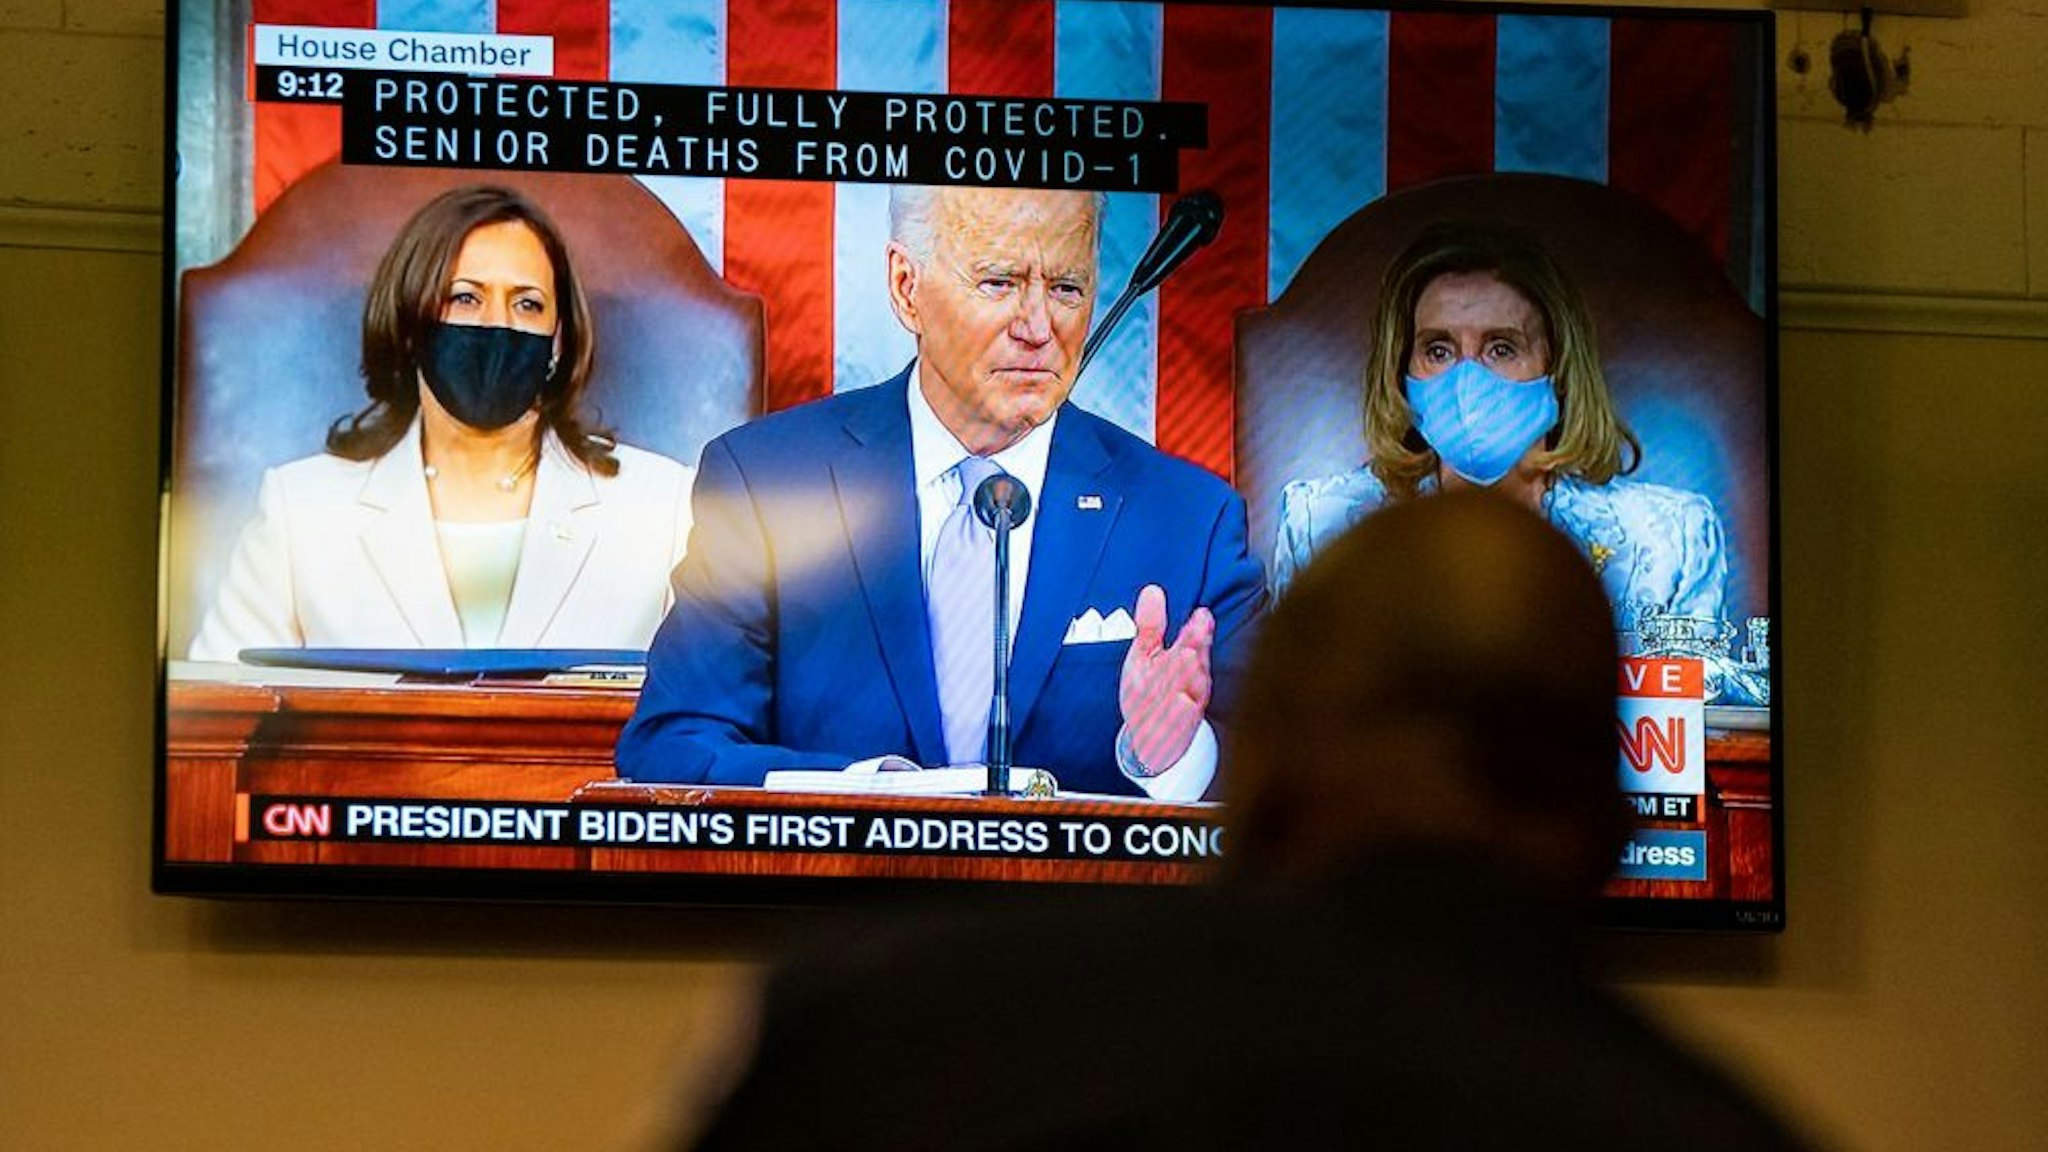 WASHINGTON, DC - APRIL 28: A Capitol Police Officer watches President Joe Bidens address of the Joint Session of the 117th Congress on a television in the Senate Press Gallery, at the U.S. Capitol Building on Wednesday, April 28, 2021 in Washington, DC.